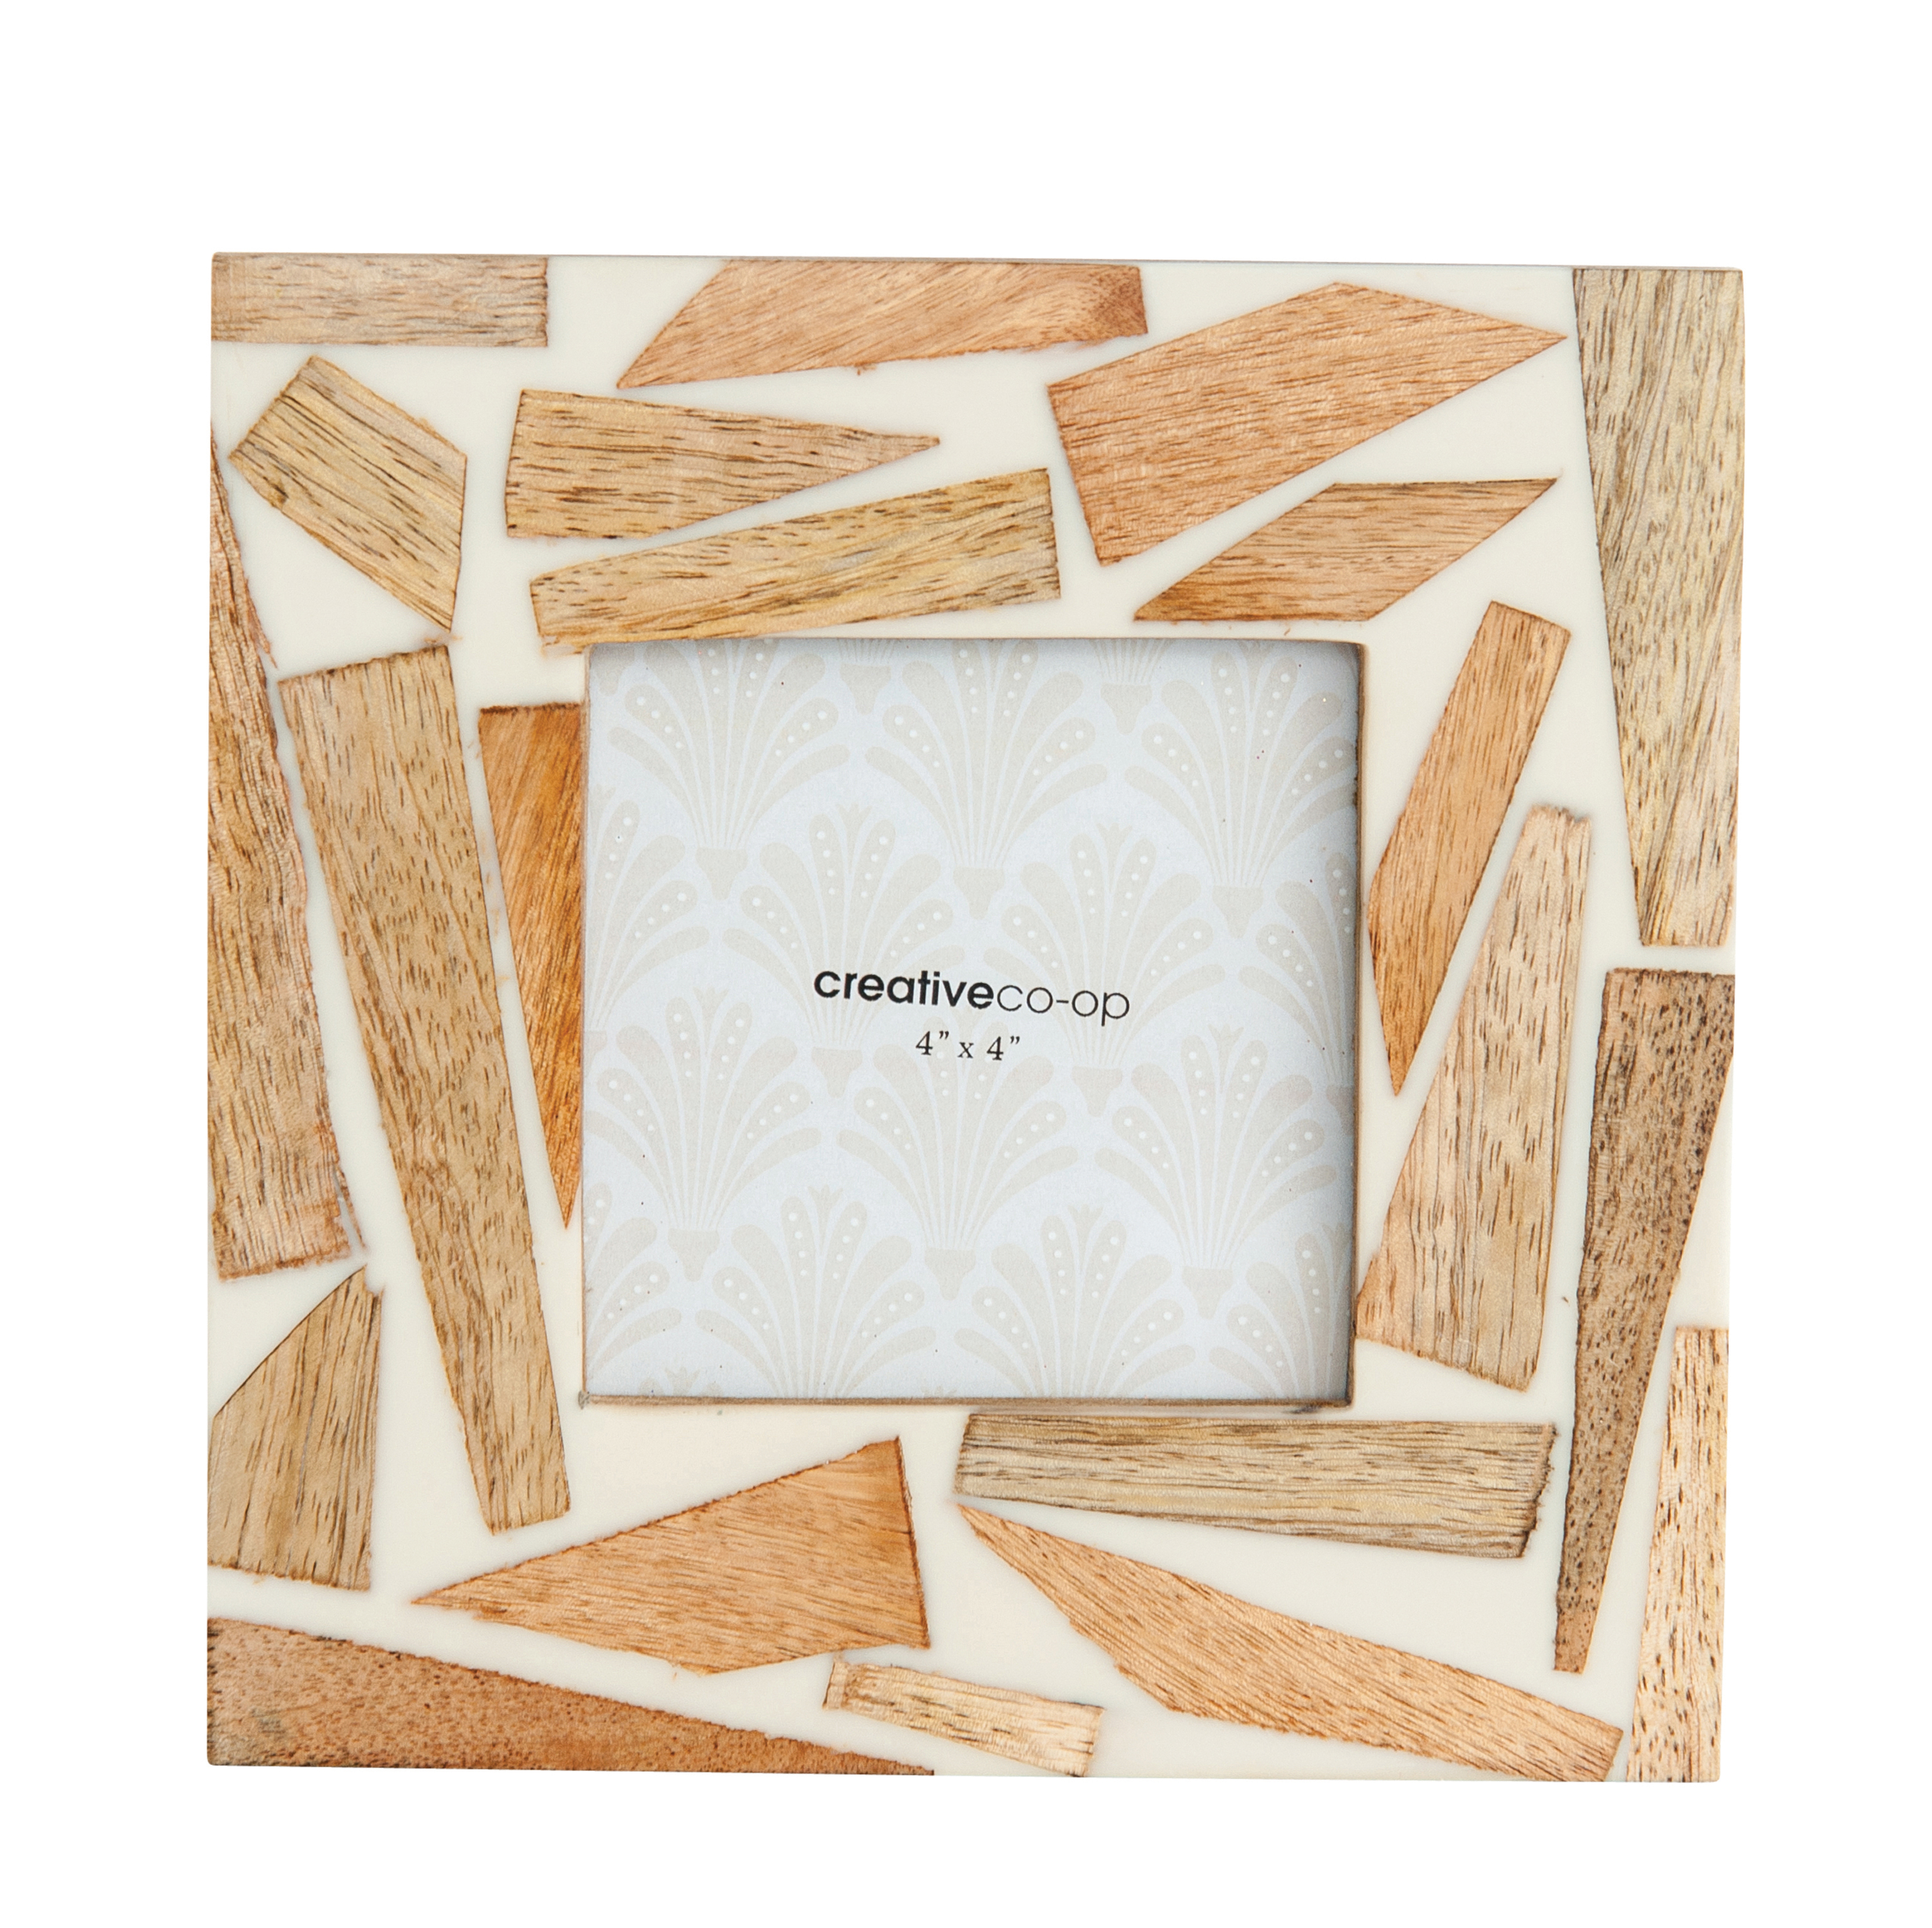 Square Resin & Wood Photo Frame (Holds 4" x 4" Photo) - Nomad Home